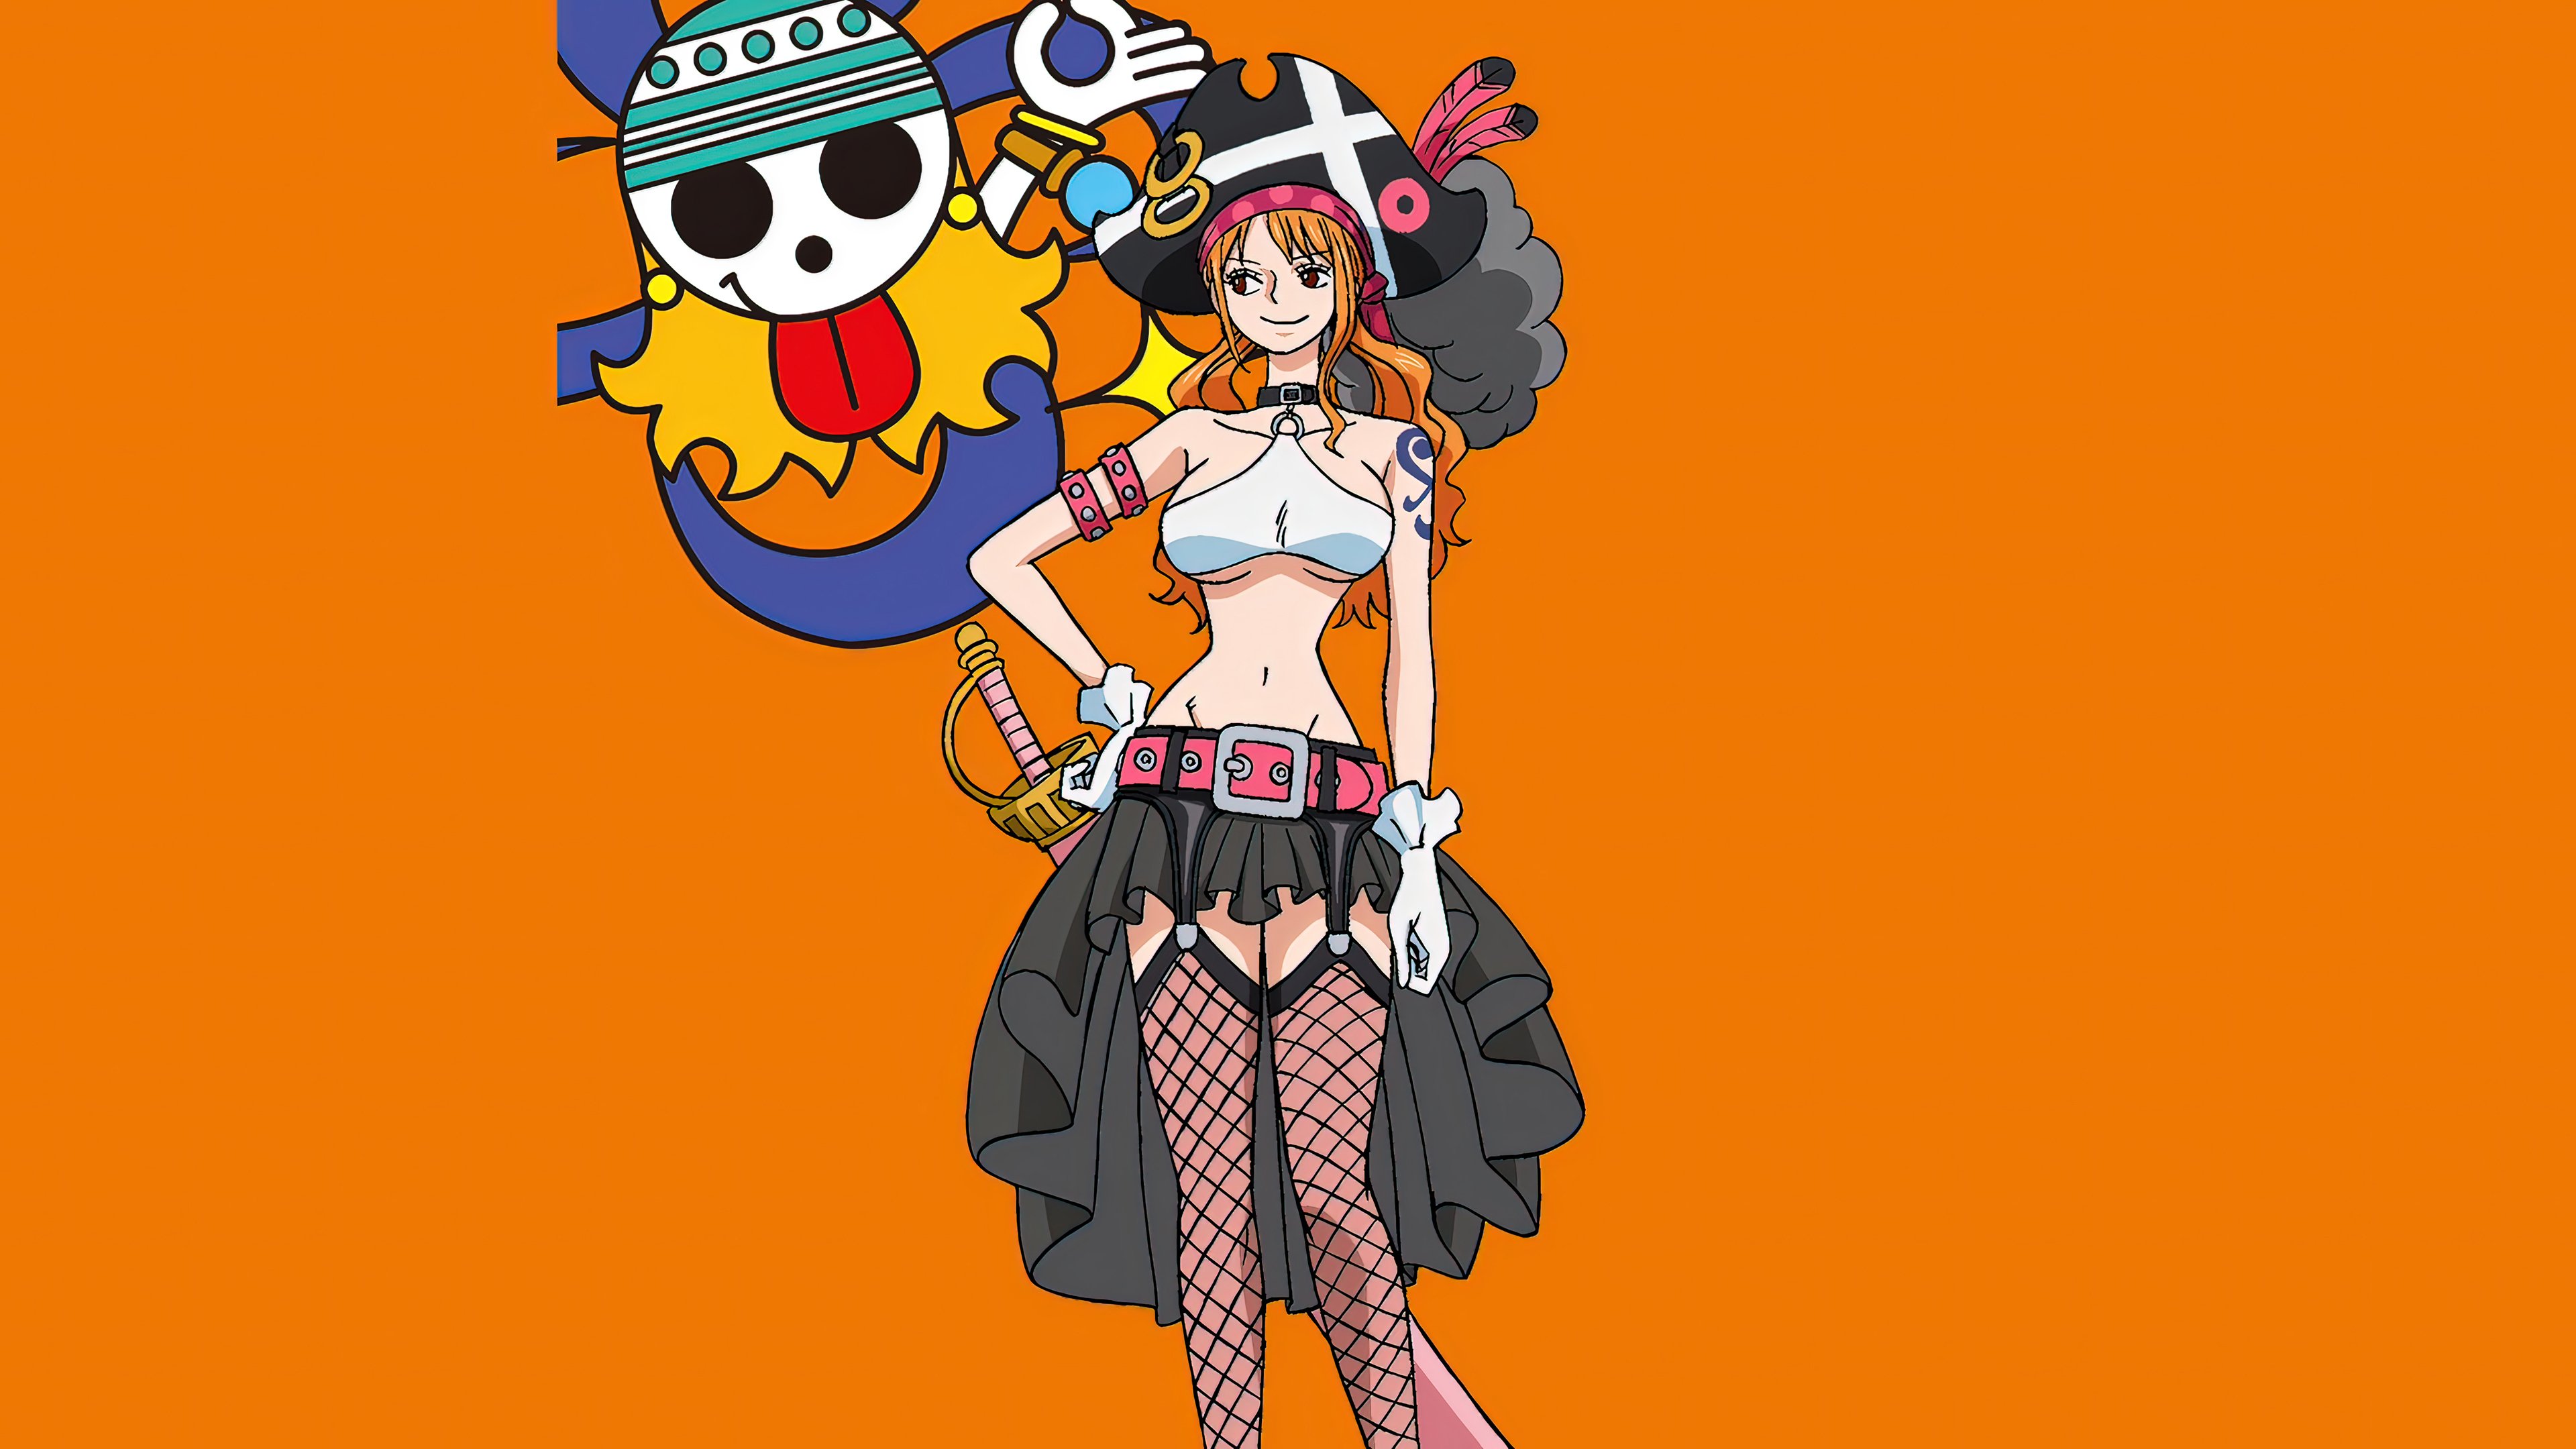 4100 Anime One Piece HD Wallpapers and Backgrounds